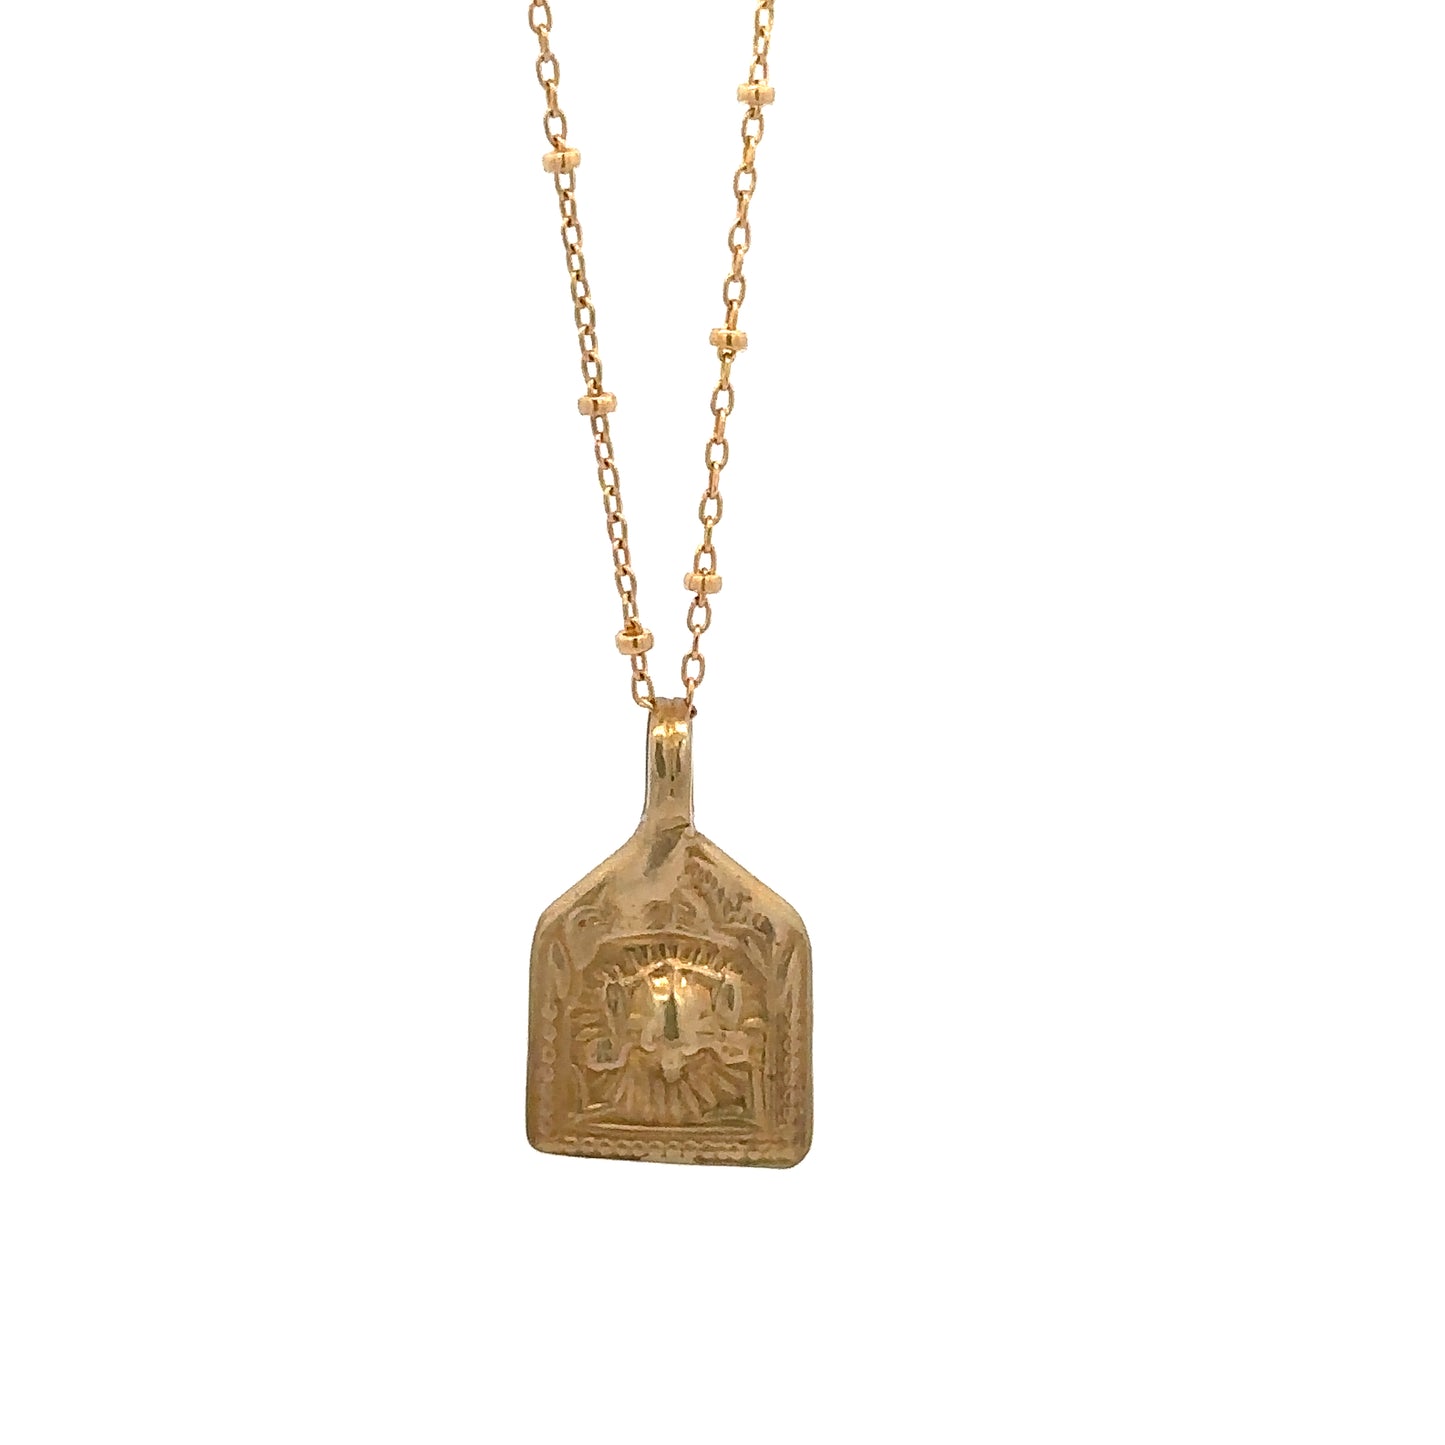 shannon len / necklace / surya - small